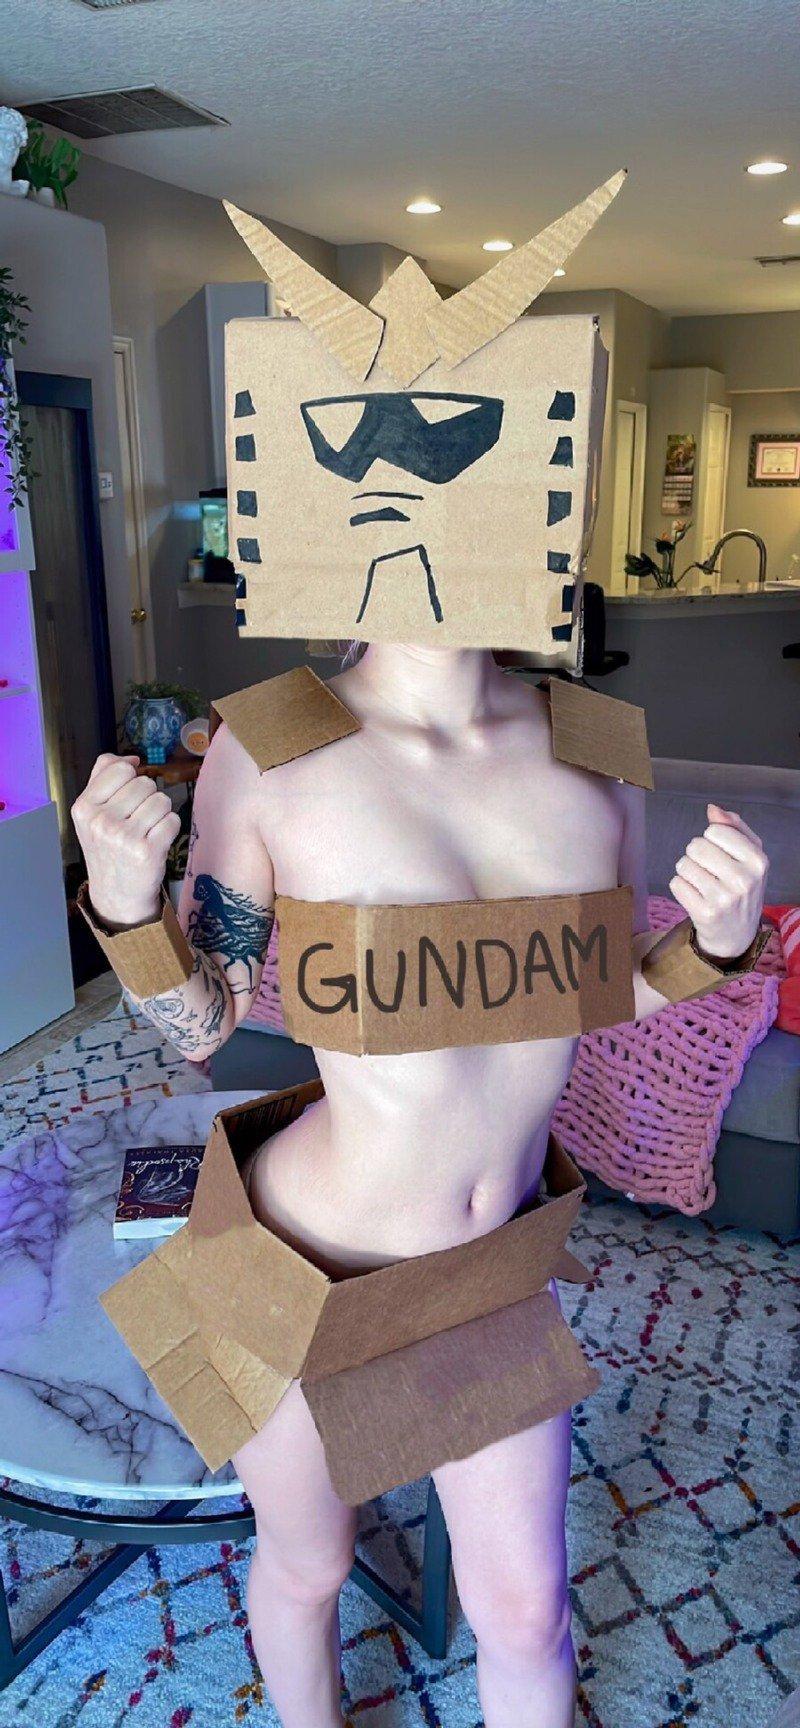 hh someone who wears a box inside out and insists it's Gundam